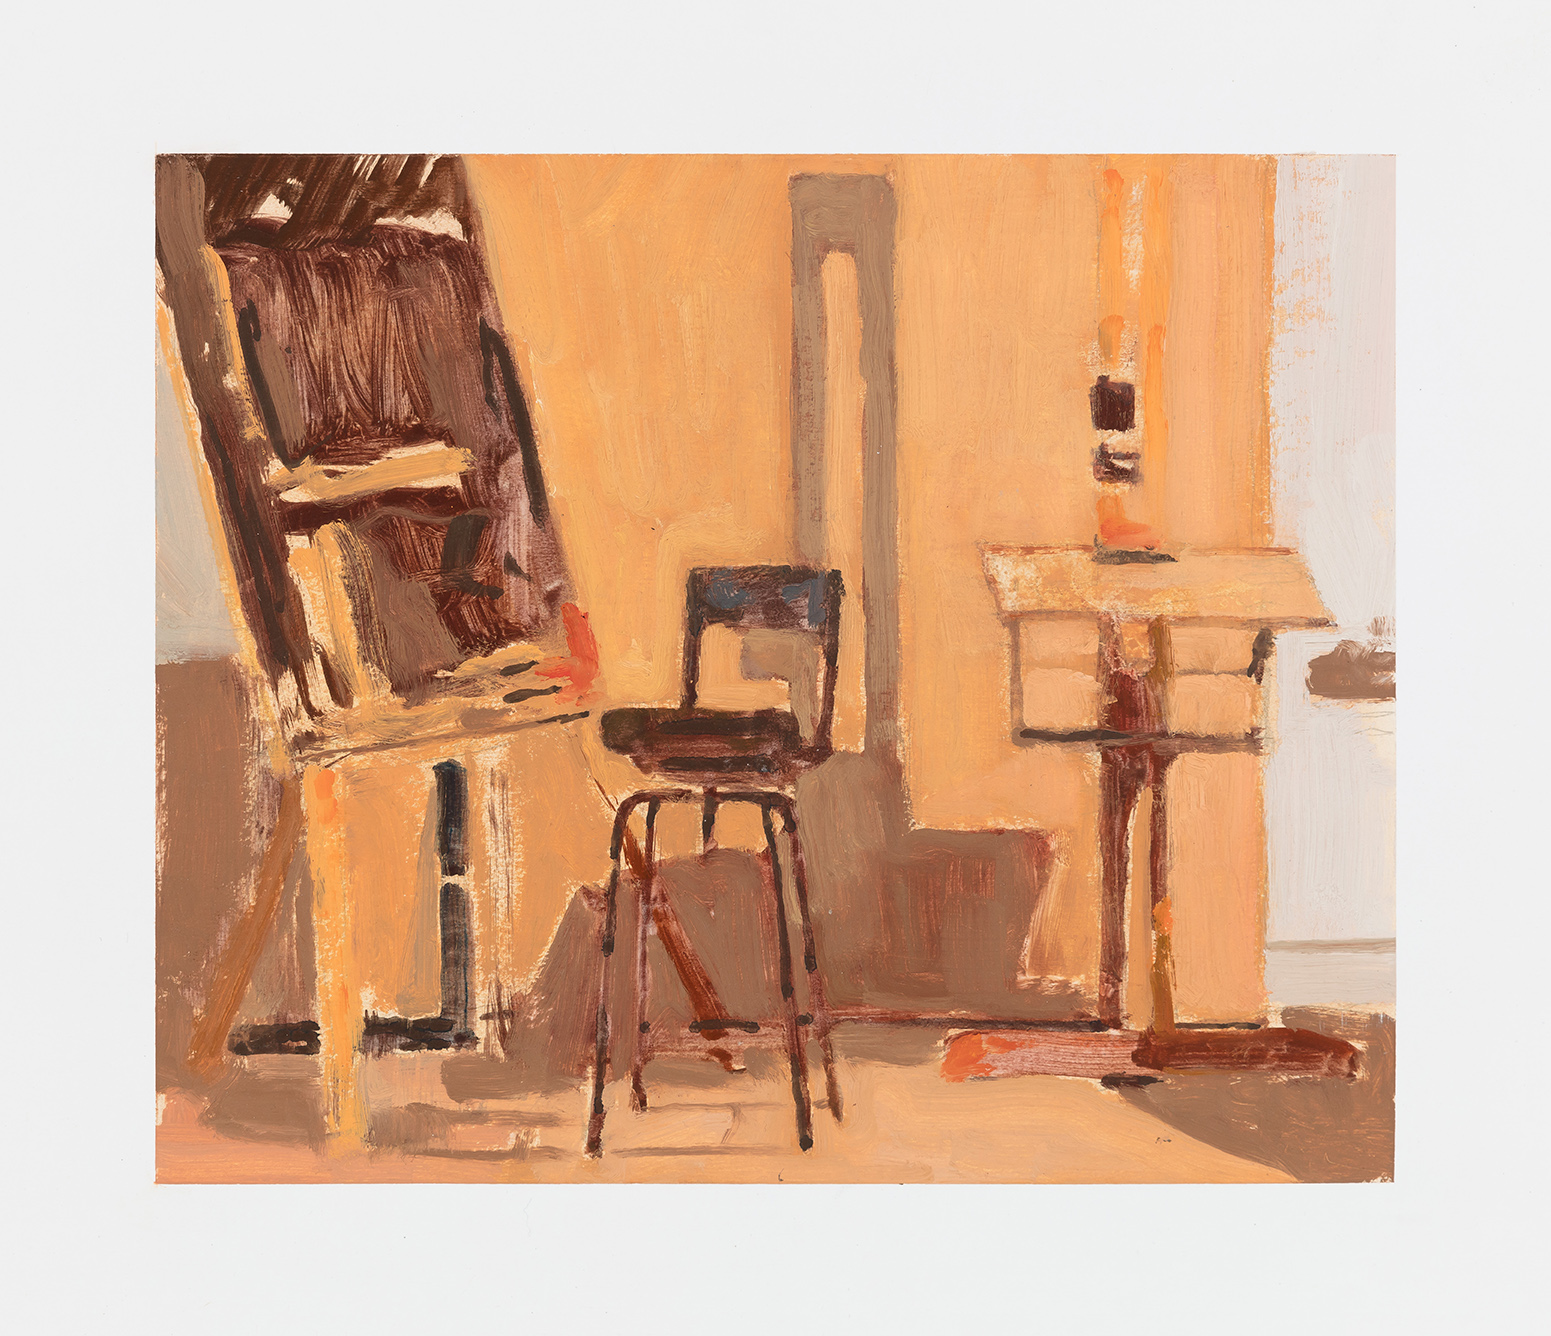  - Studio with Chair and Set Square, 2017